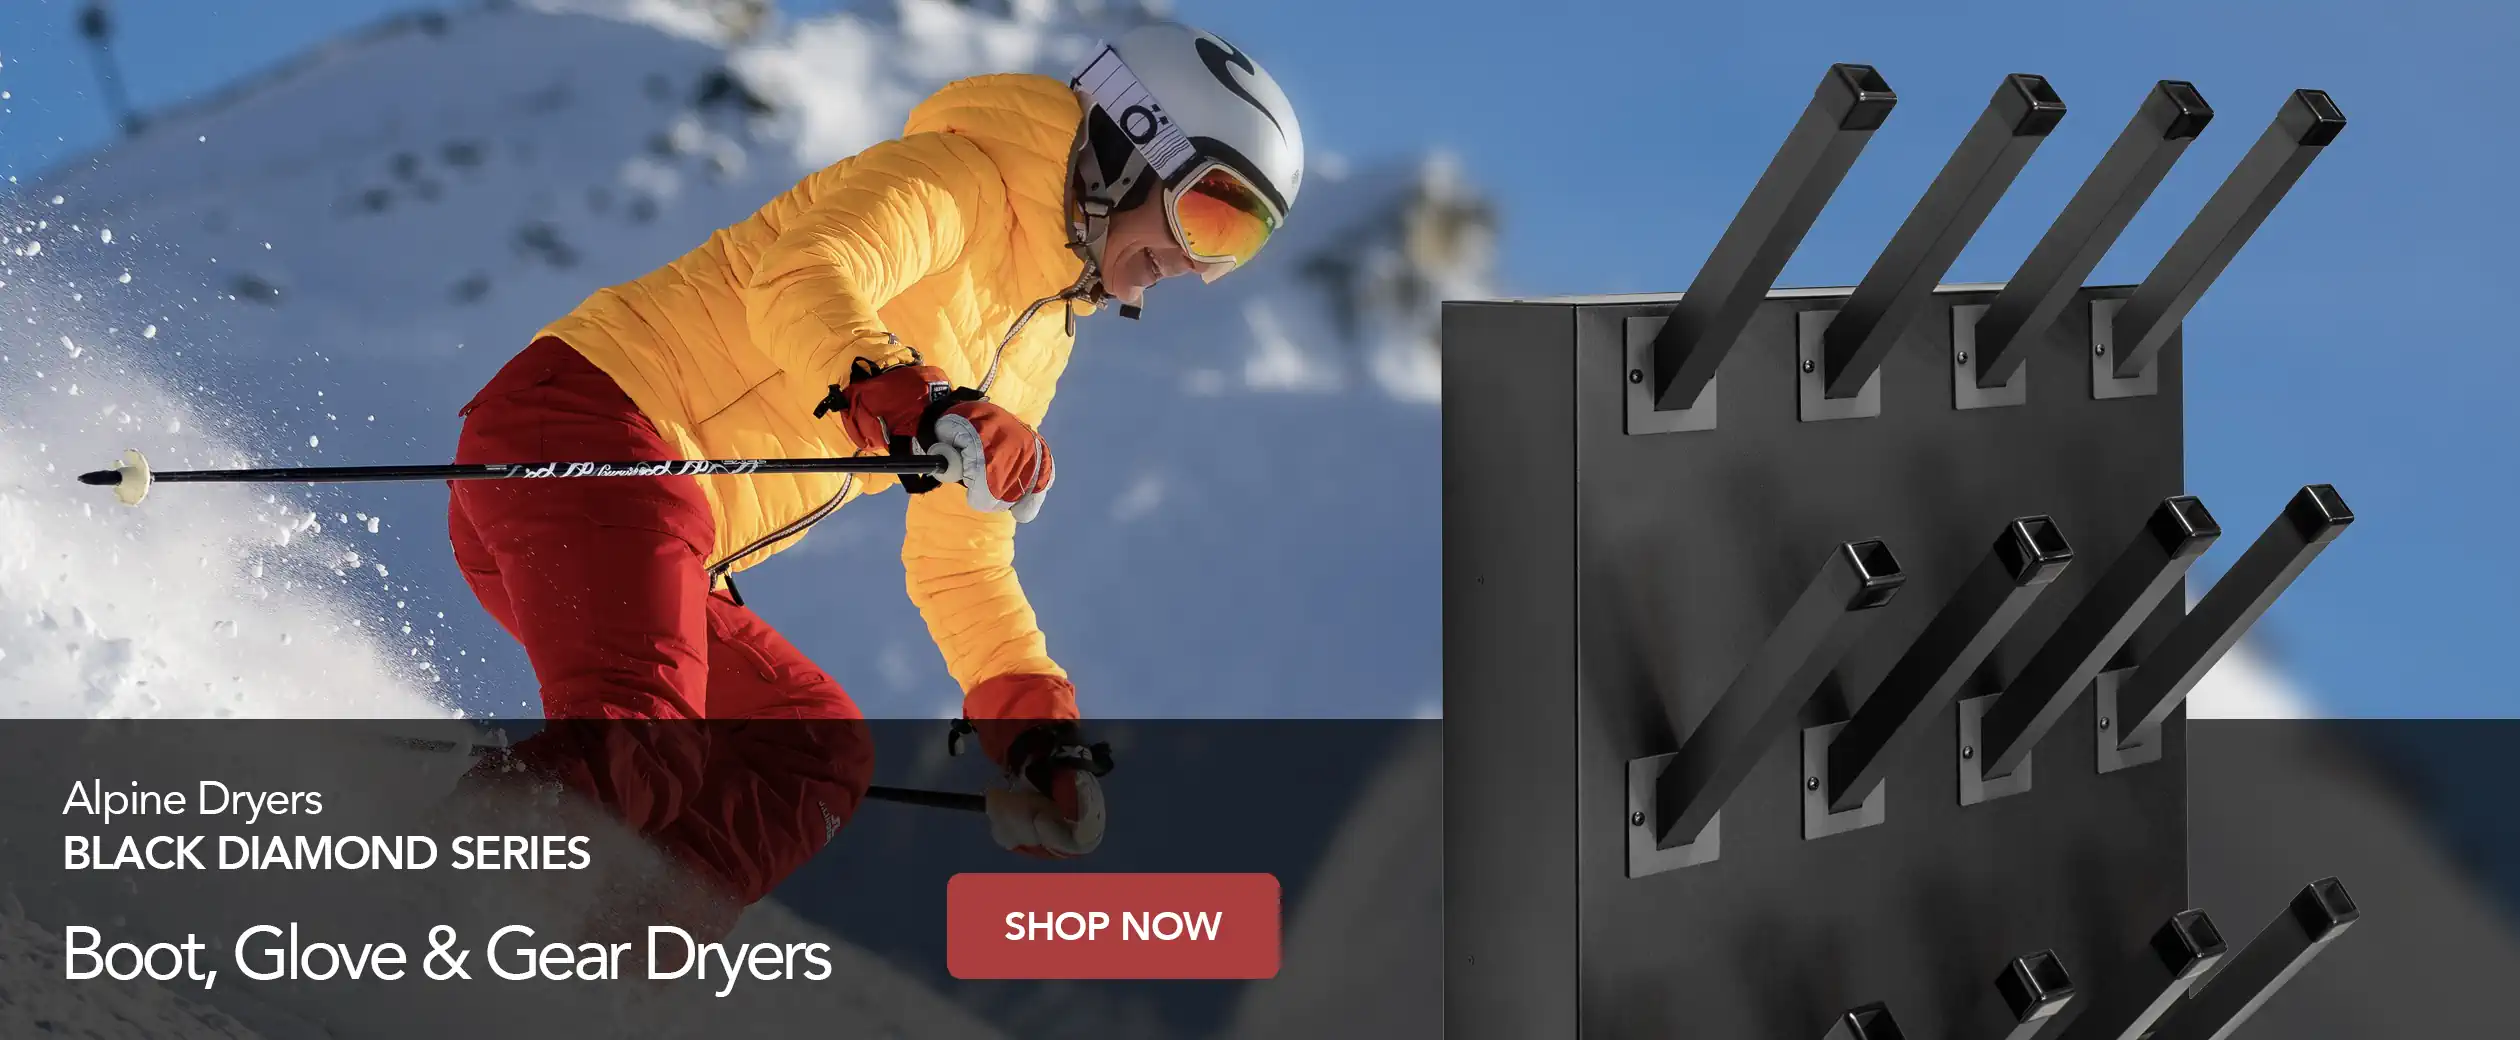 Alpine Dryers - for boots, gloves and gear